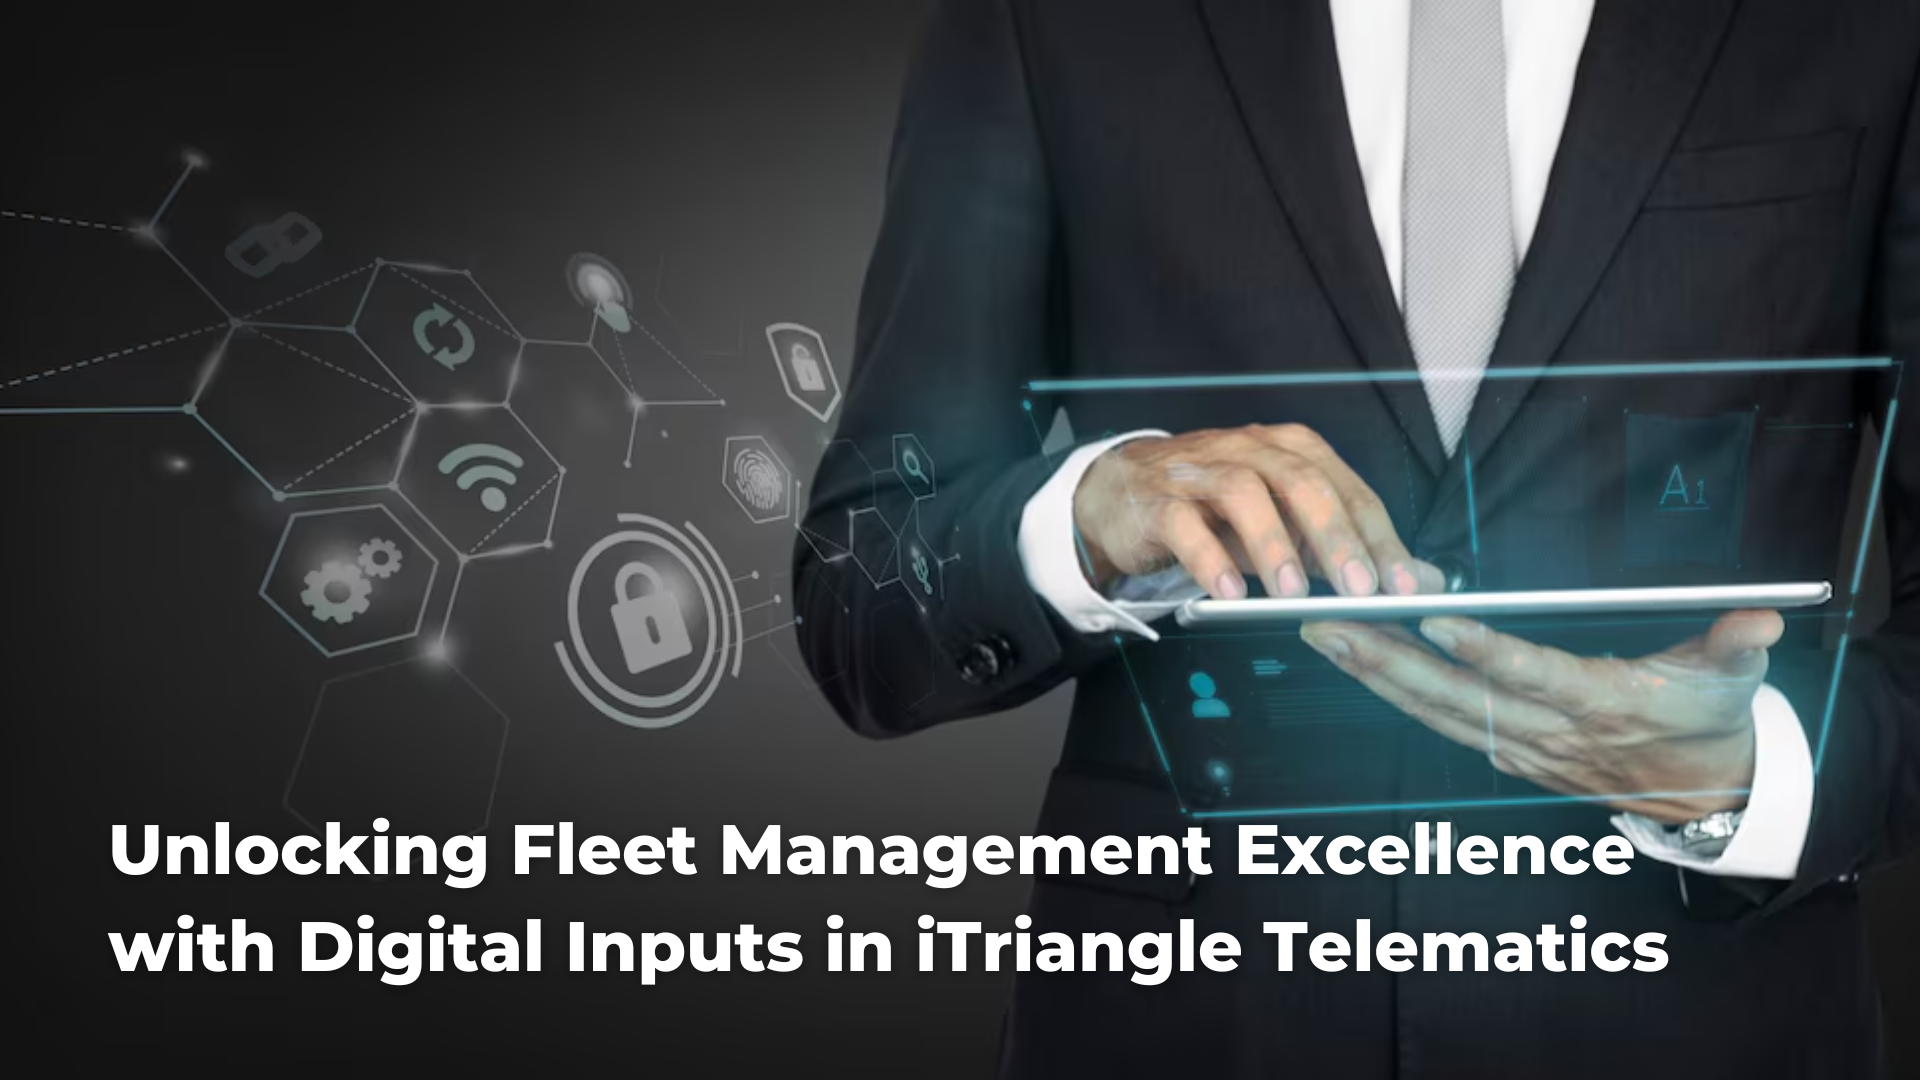 Unlocking Fleet Management Excellence with Digital Inputs in iTriangle Telematics